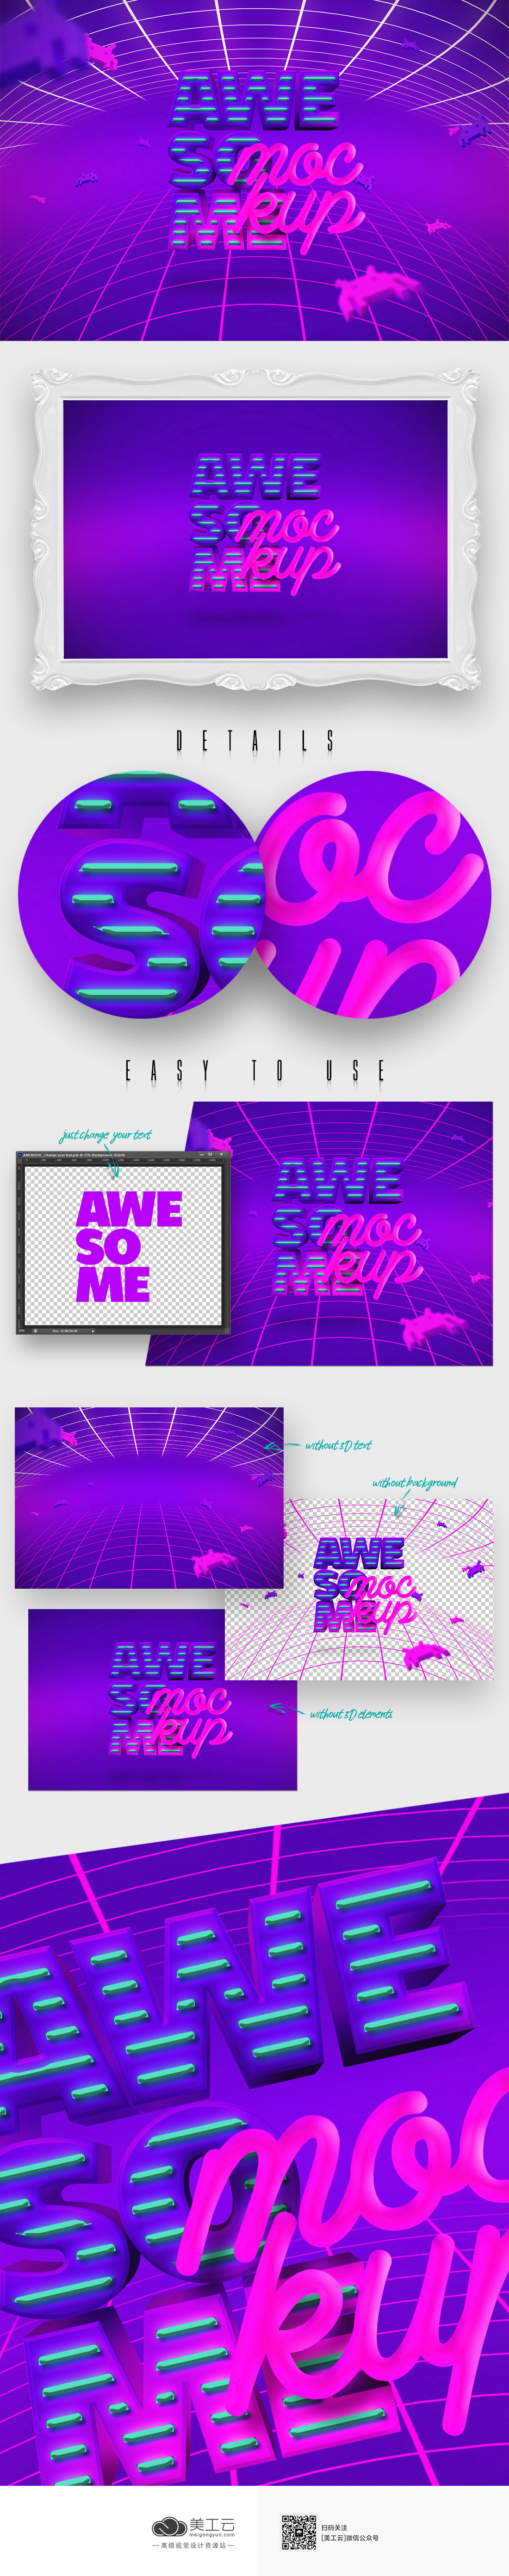 Awesome 3D Text Mockup#13